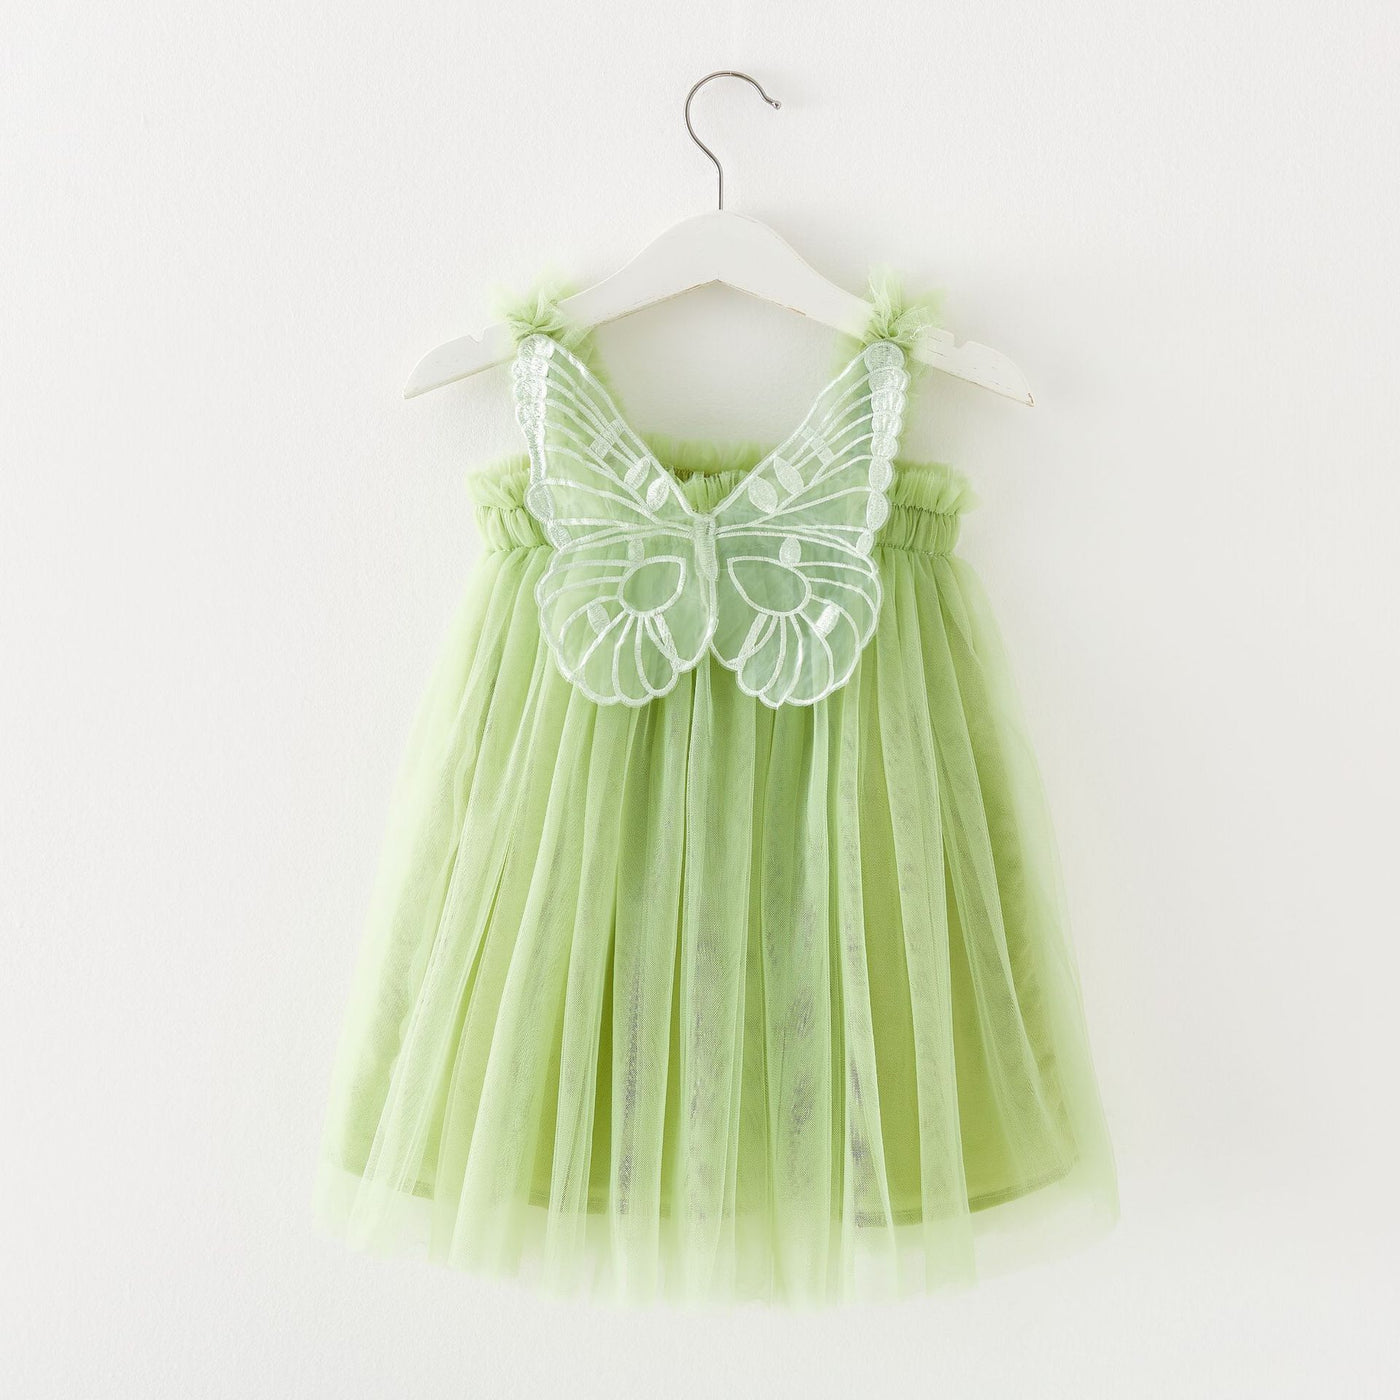 Butterfly Fairy Tutu 12M-6yrs Dress W/ Wings - Coco Potato - dresses and partywear for little girls